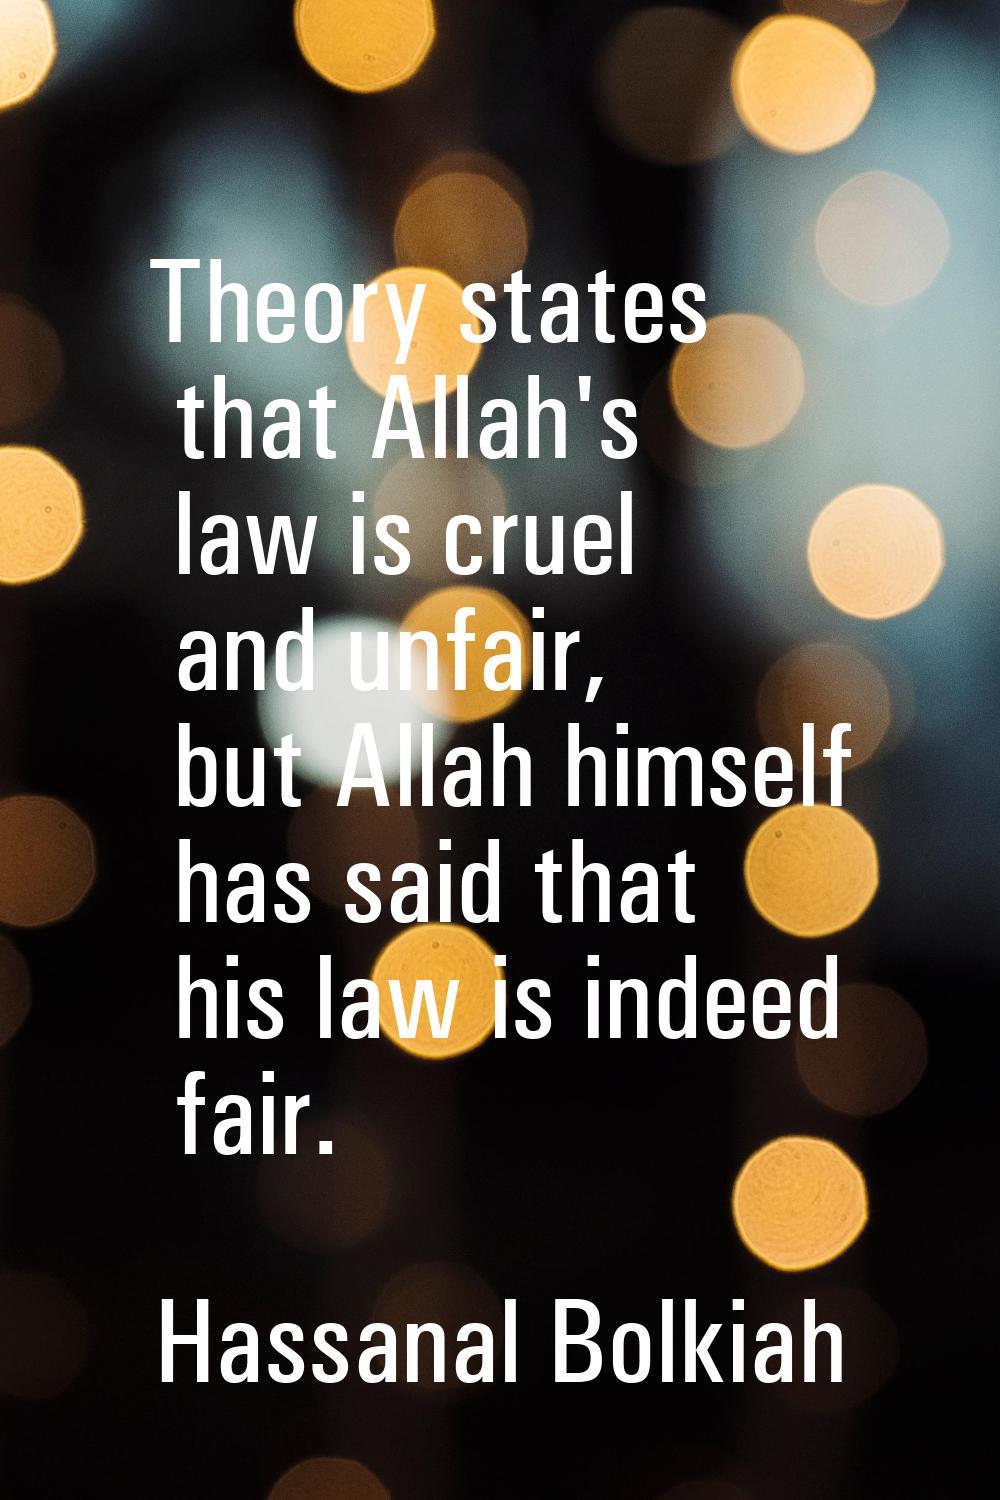 Theory states that Allah's law is cruel and unfair, but Allah himself has said that his law is inde